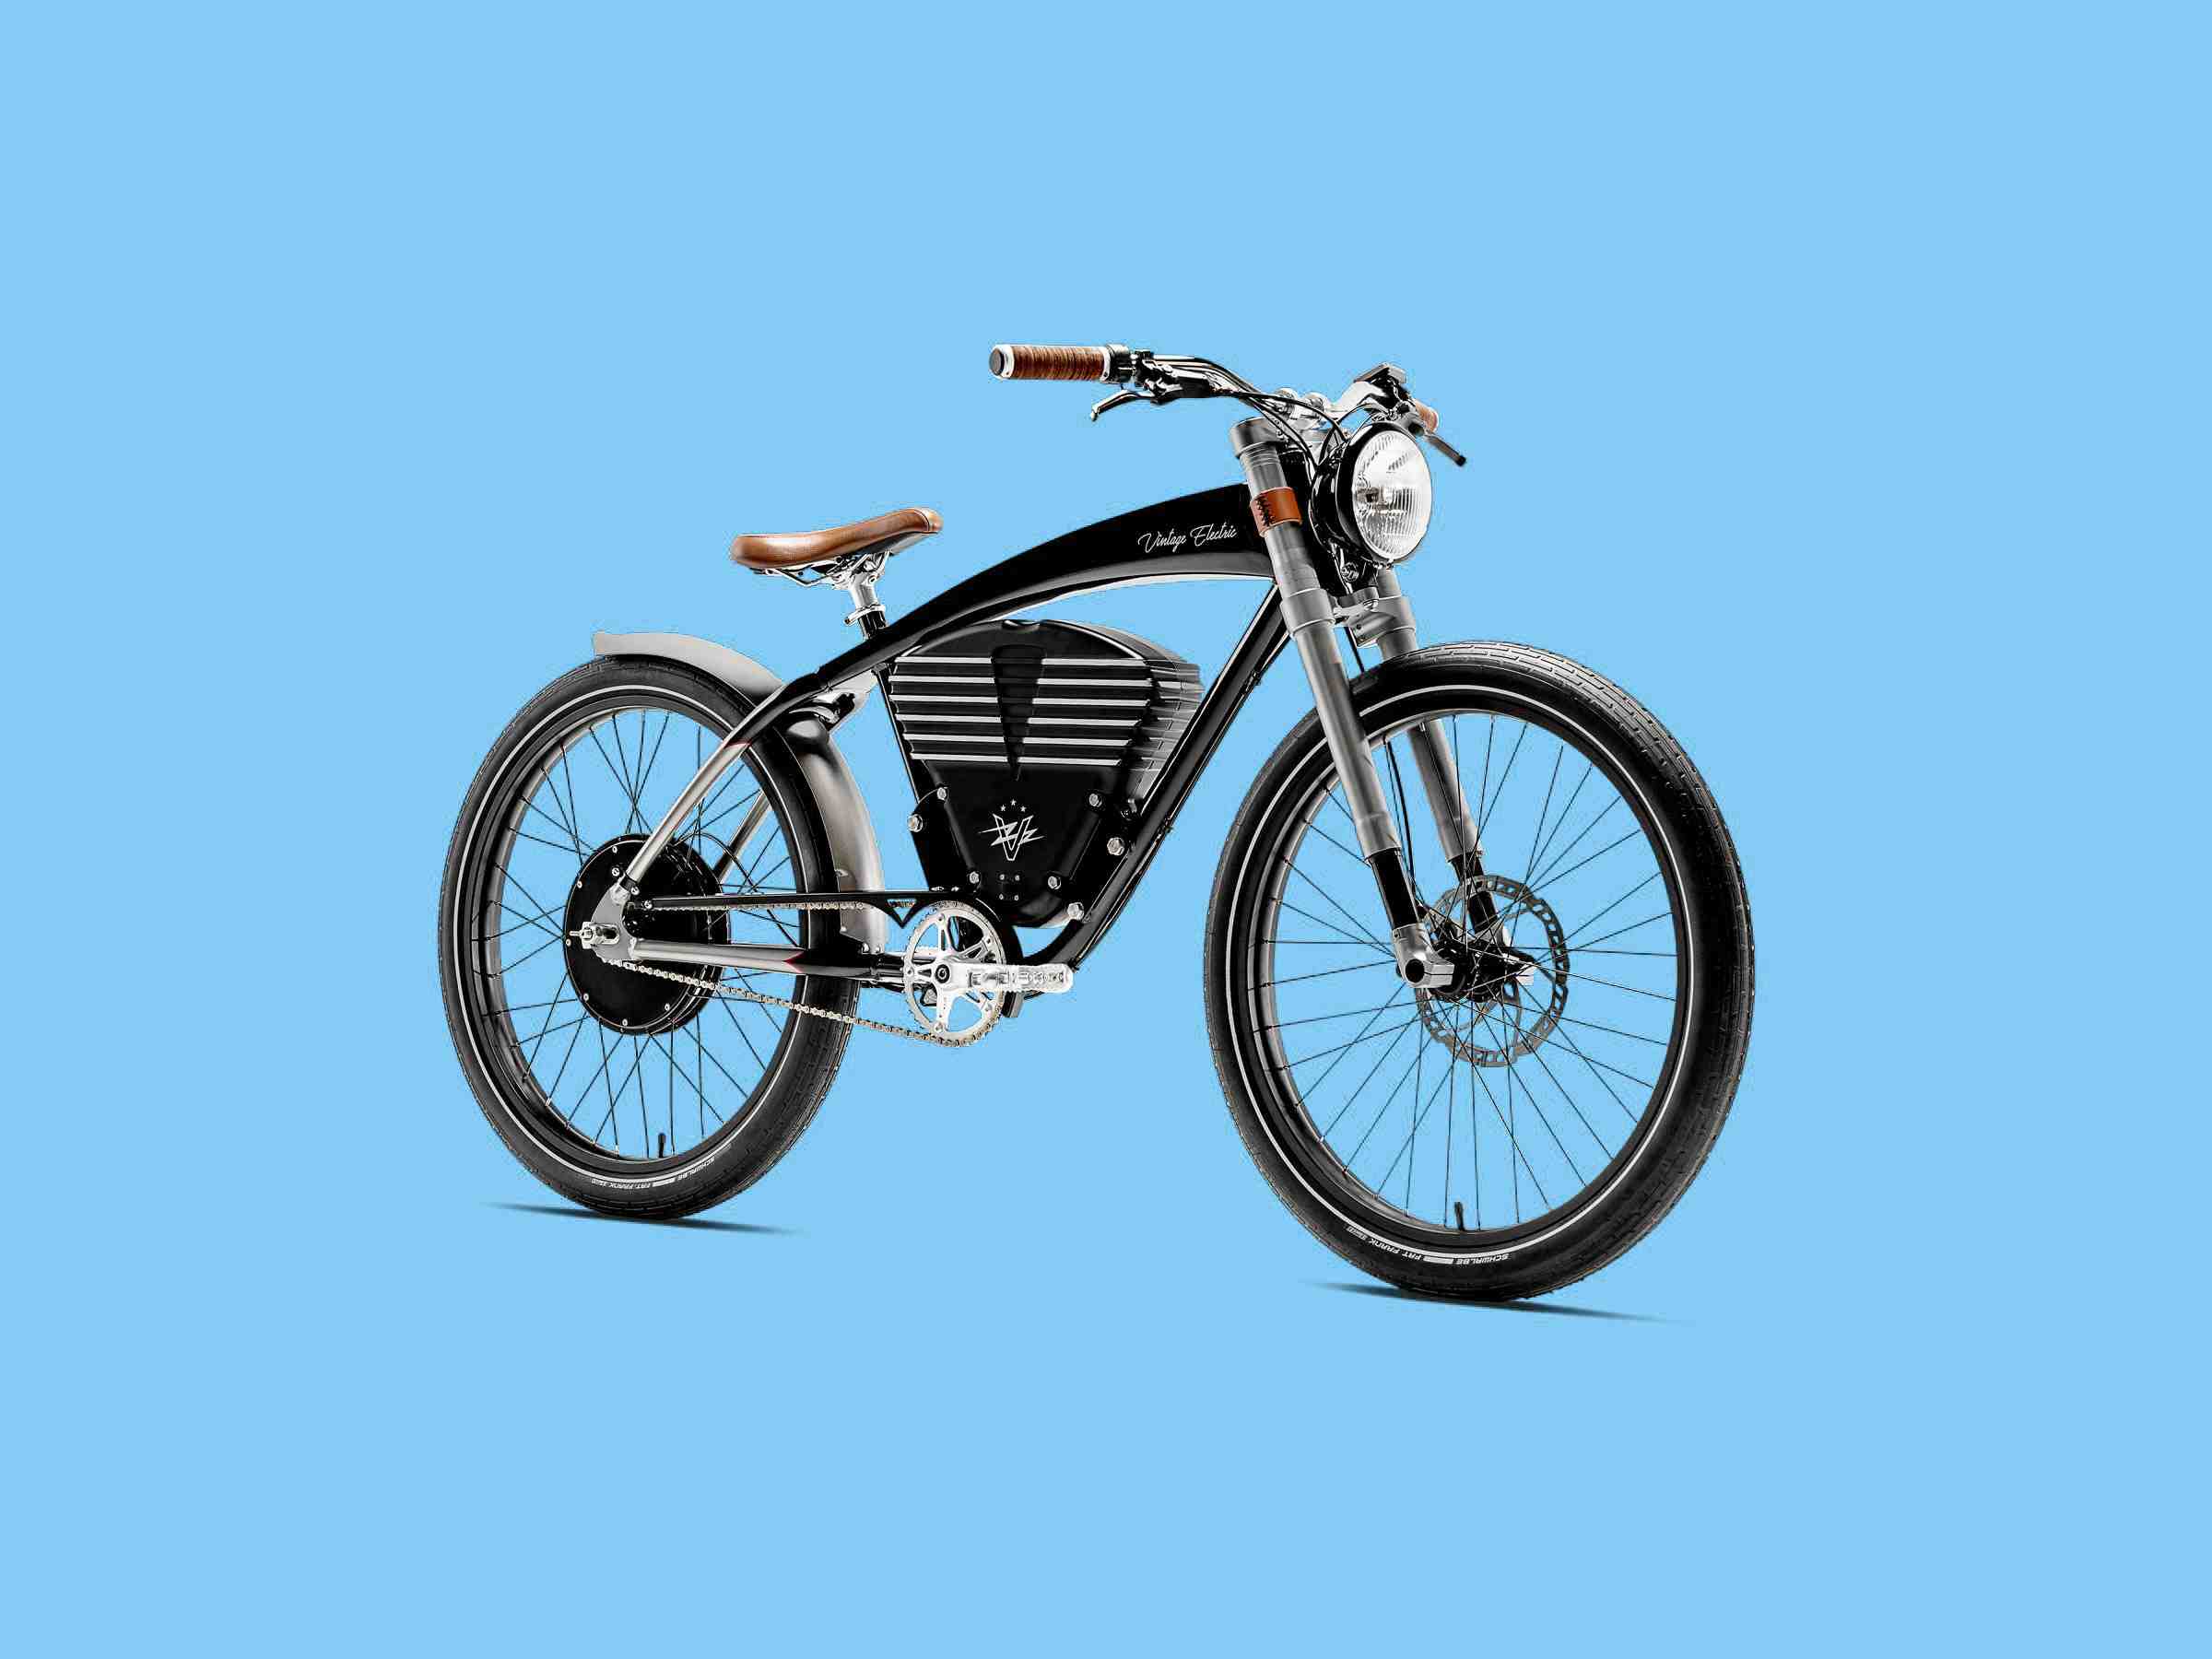 Which motor is used in electric bike?